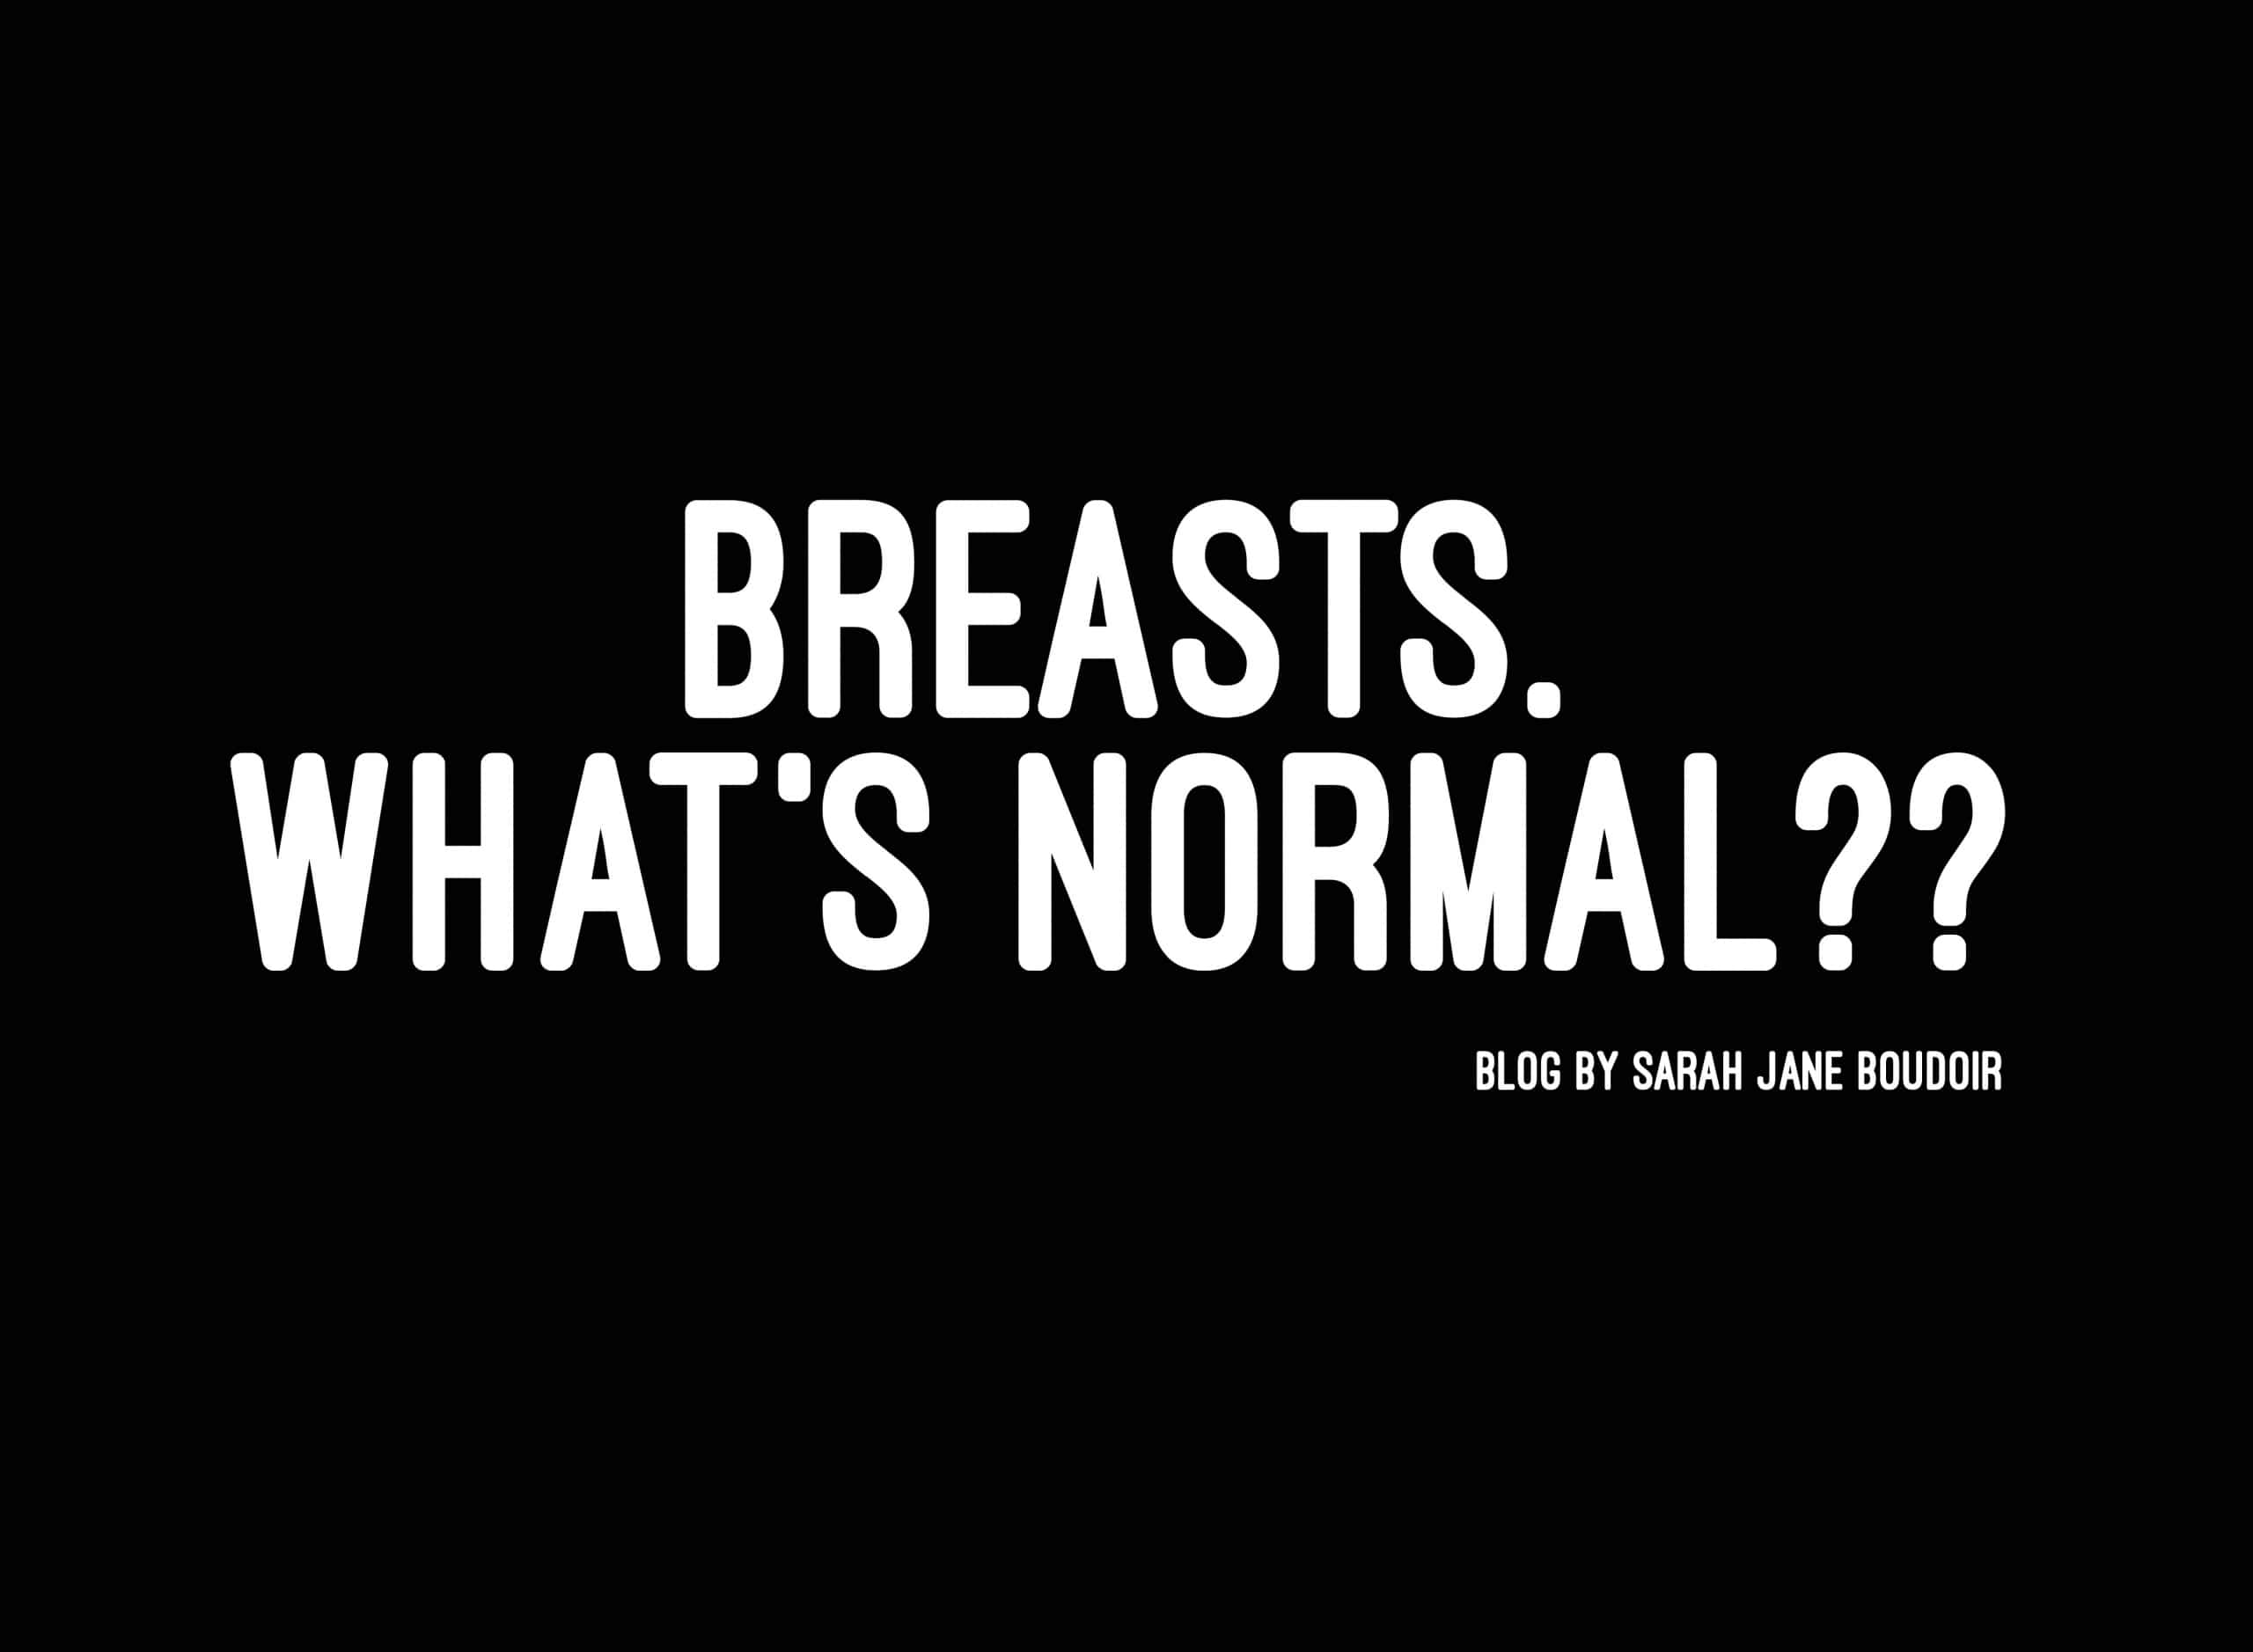 Breasts, what's normal